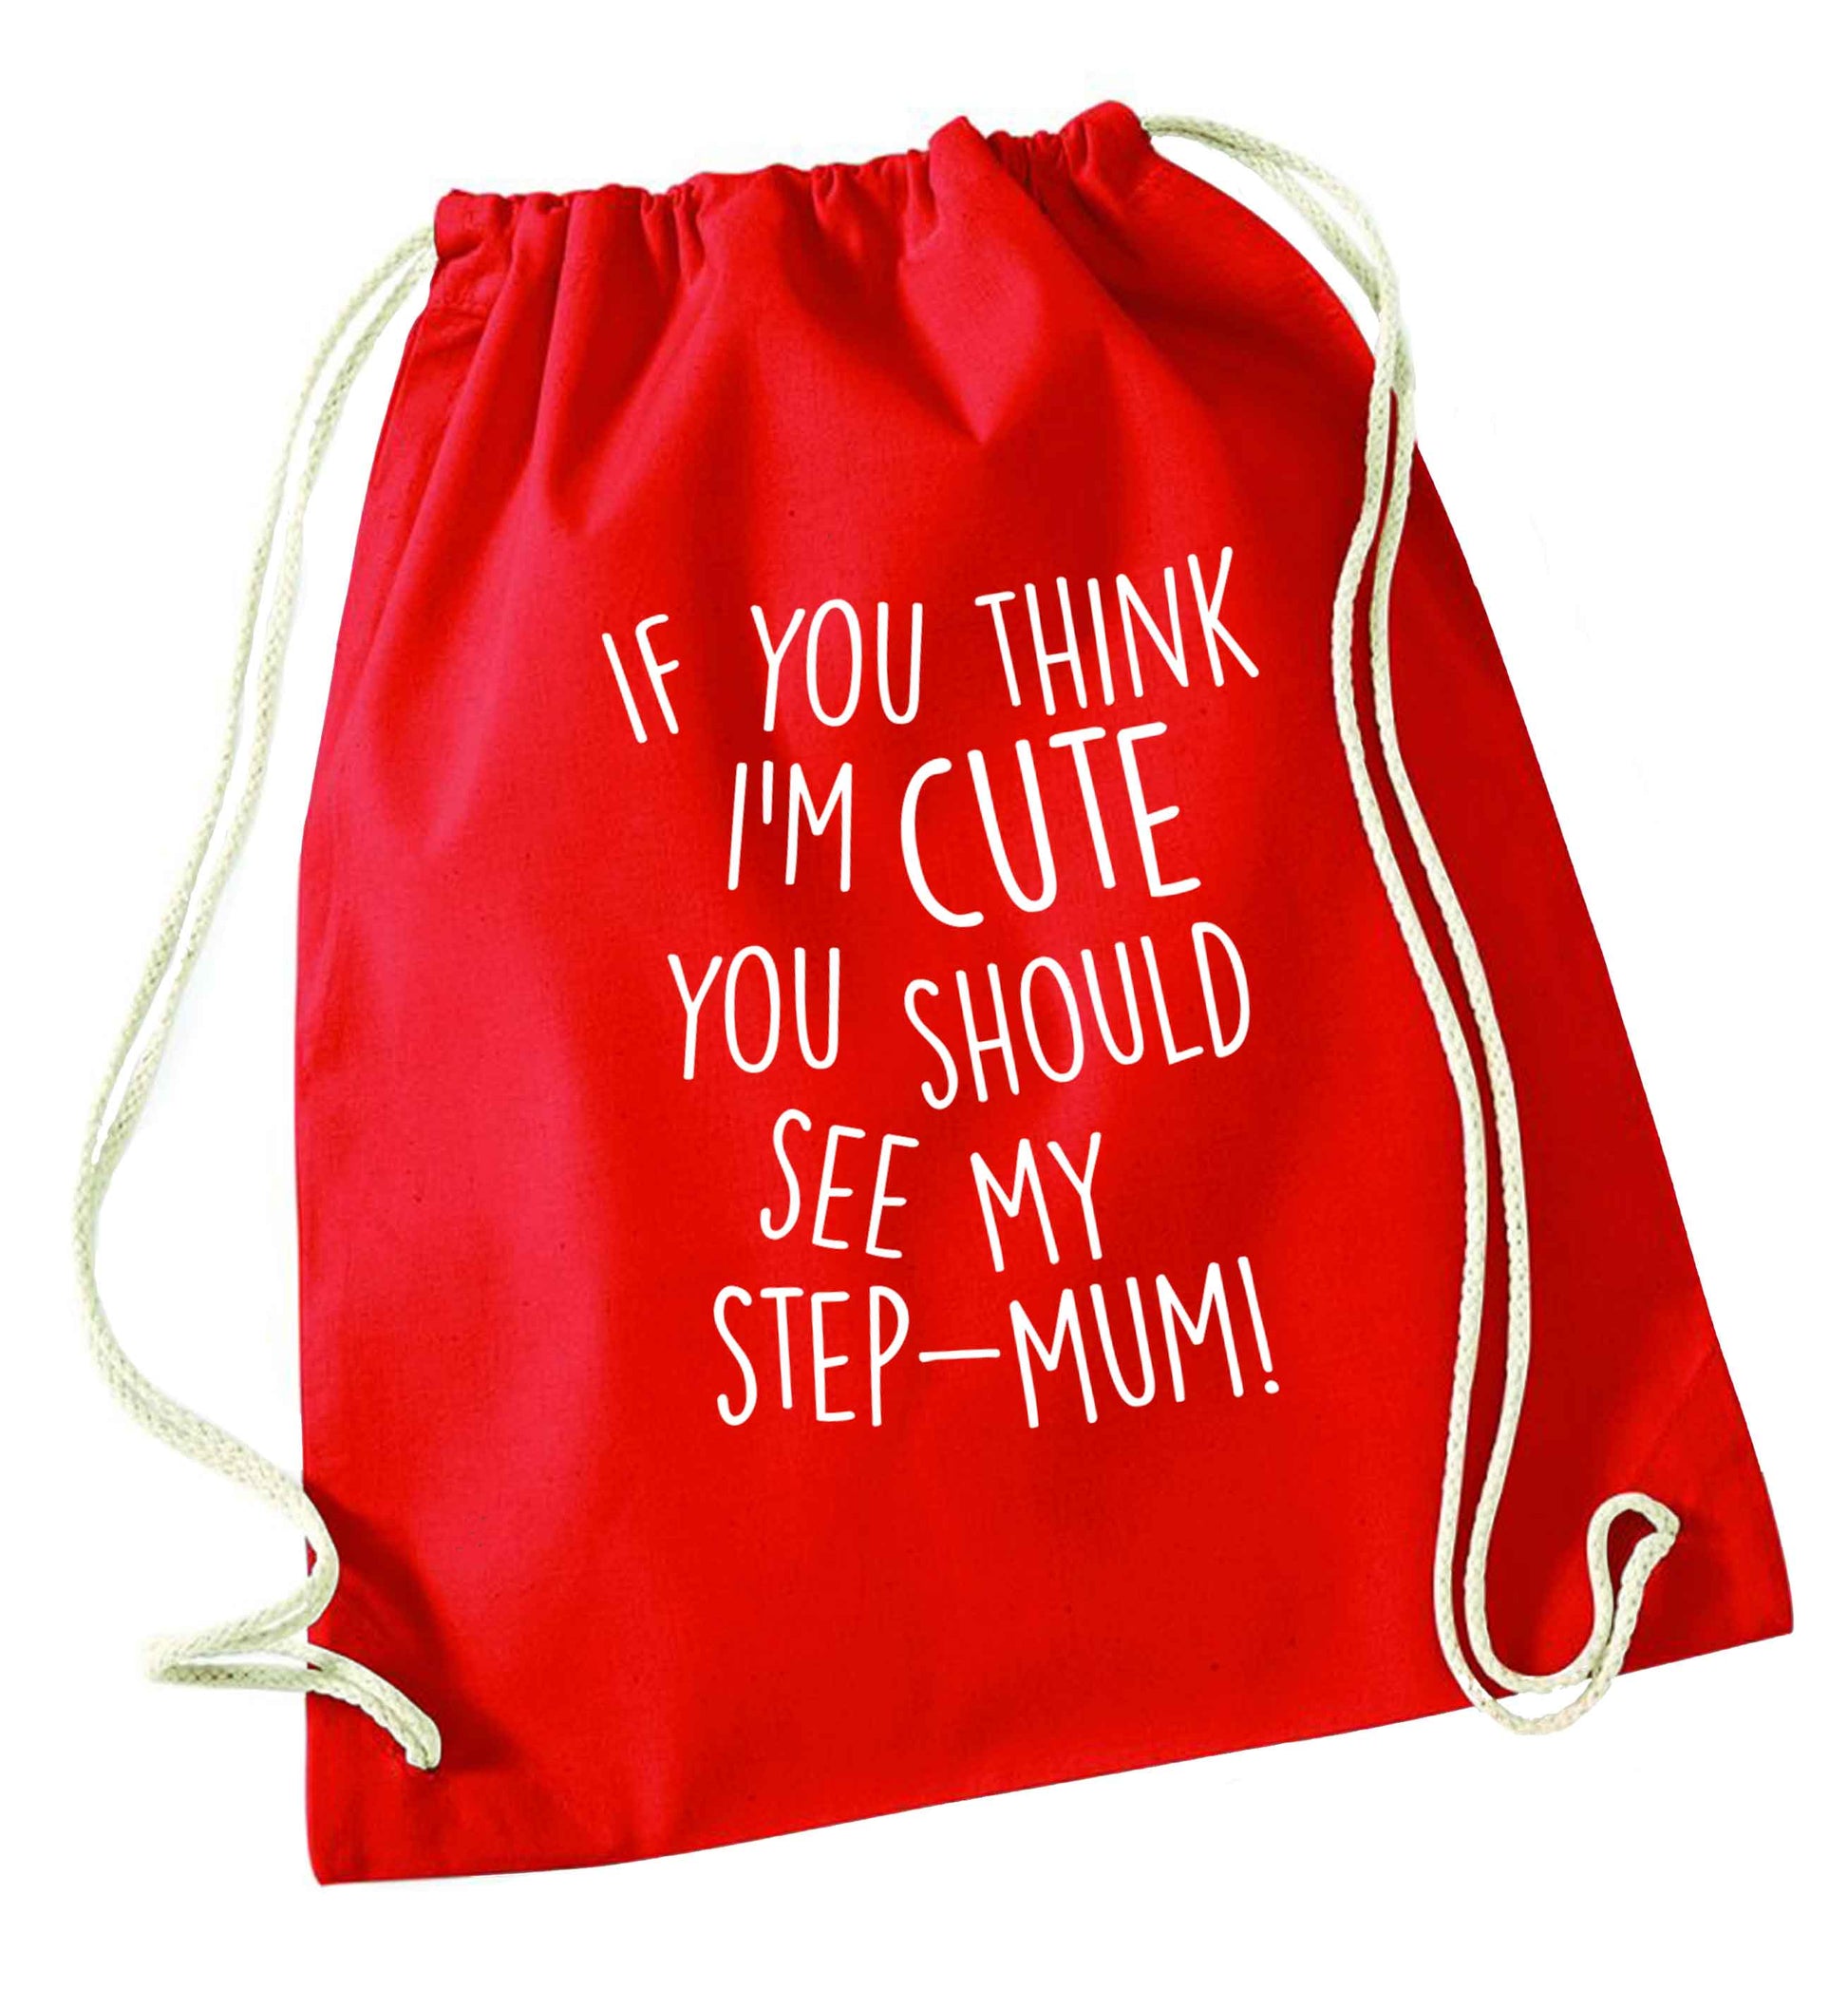 My step-mum loves me to the moon and back red drawstring bag 